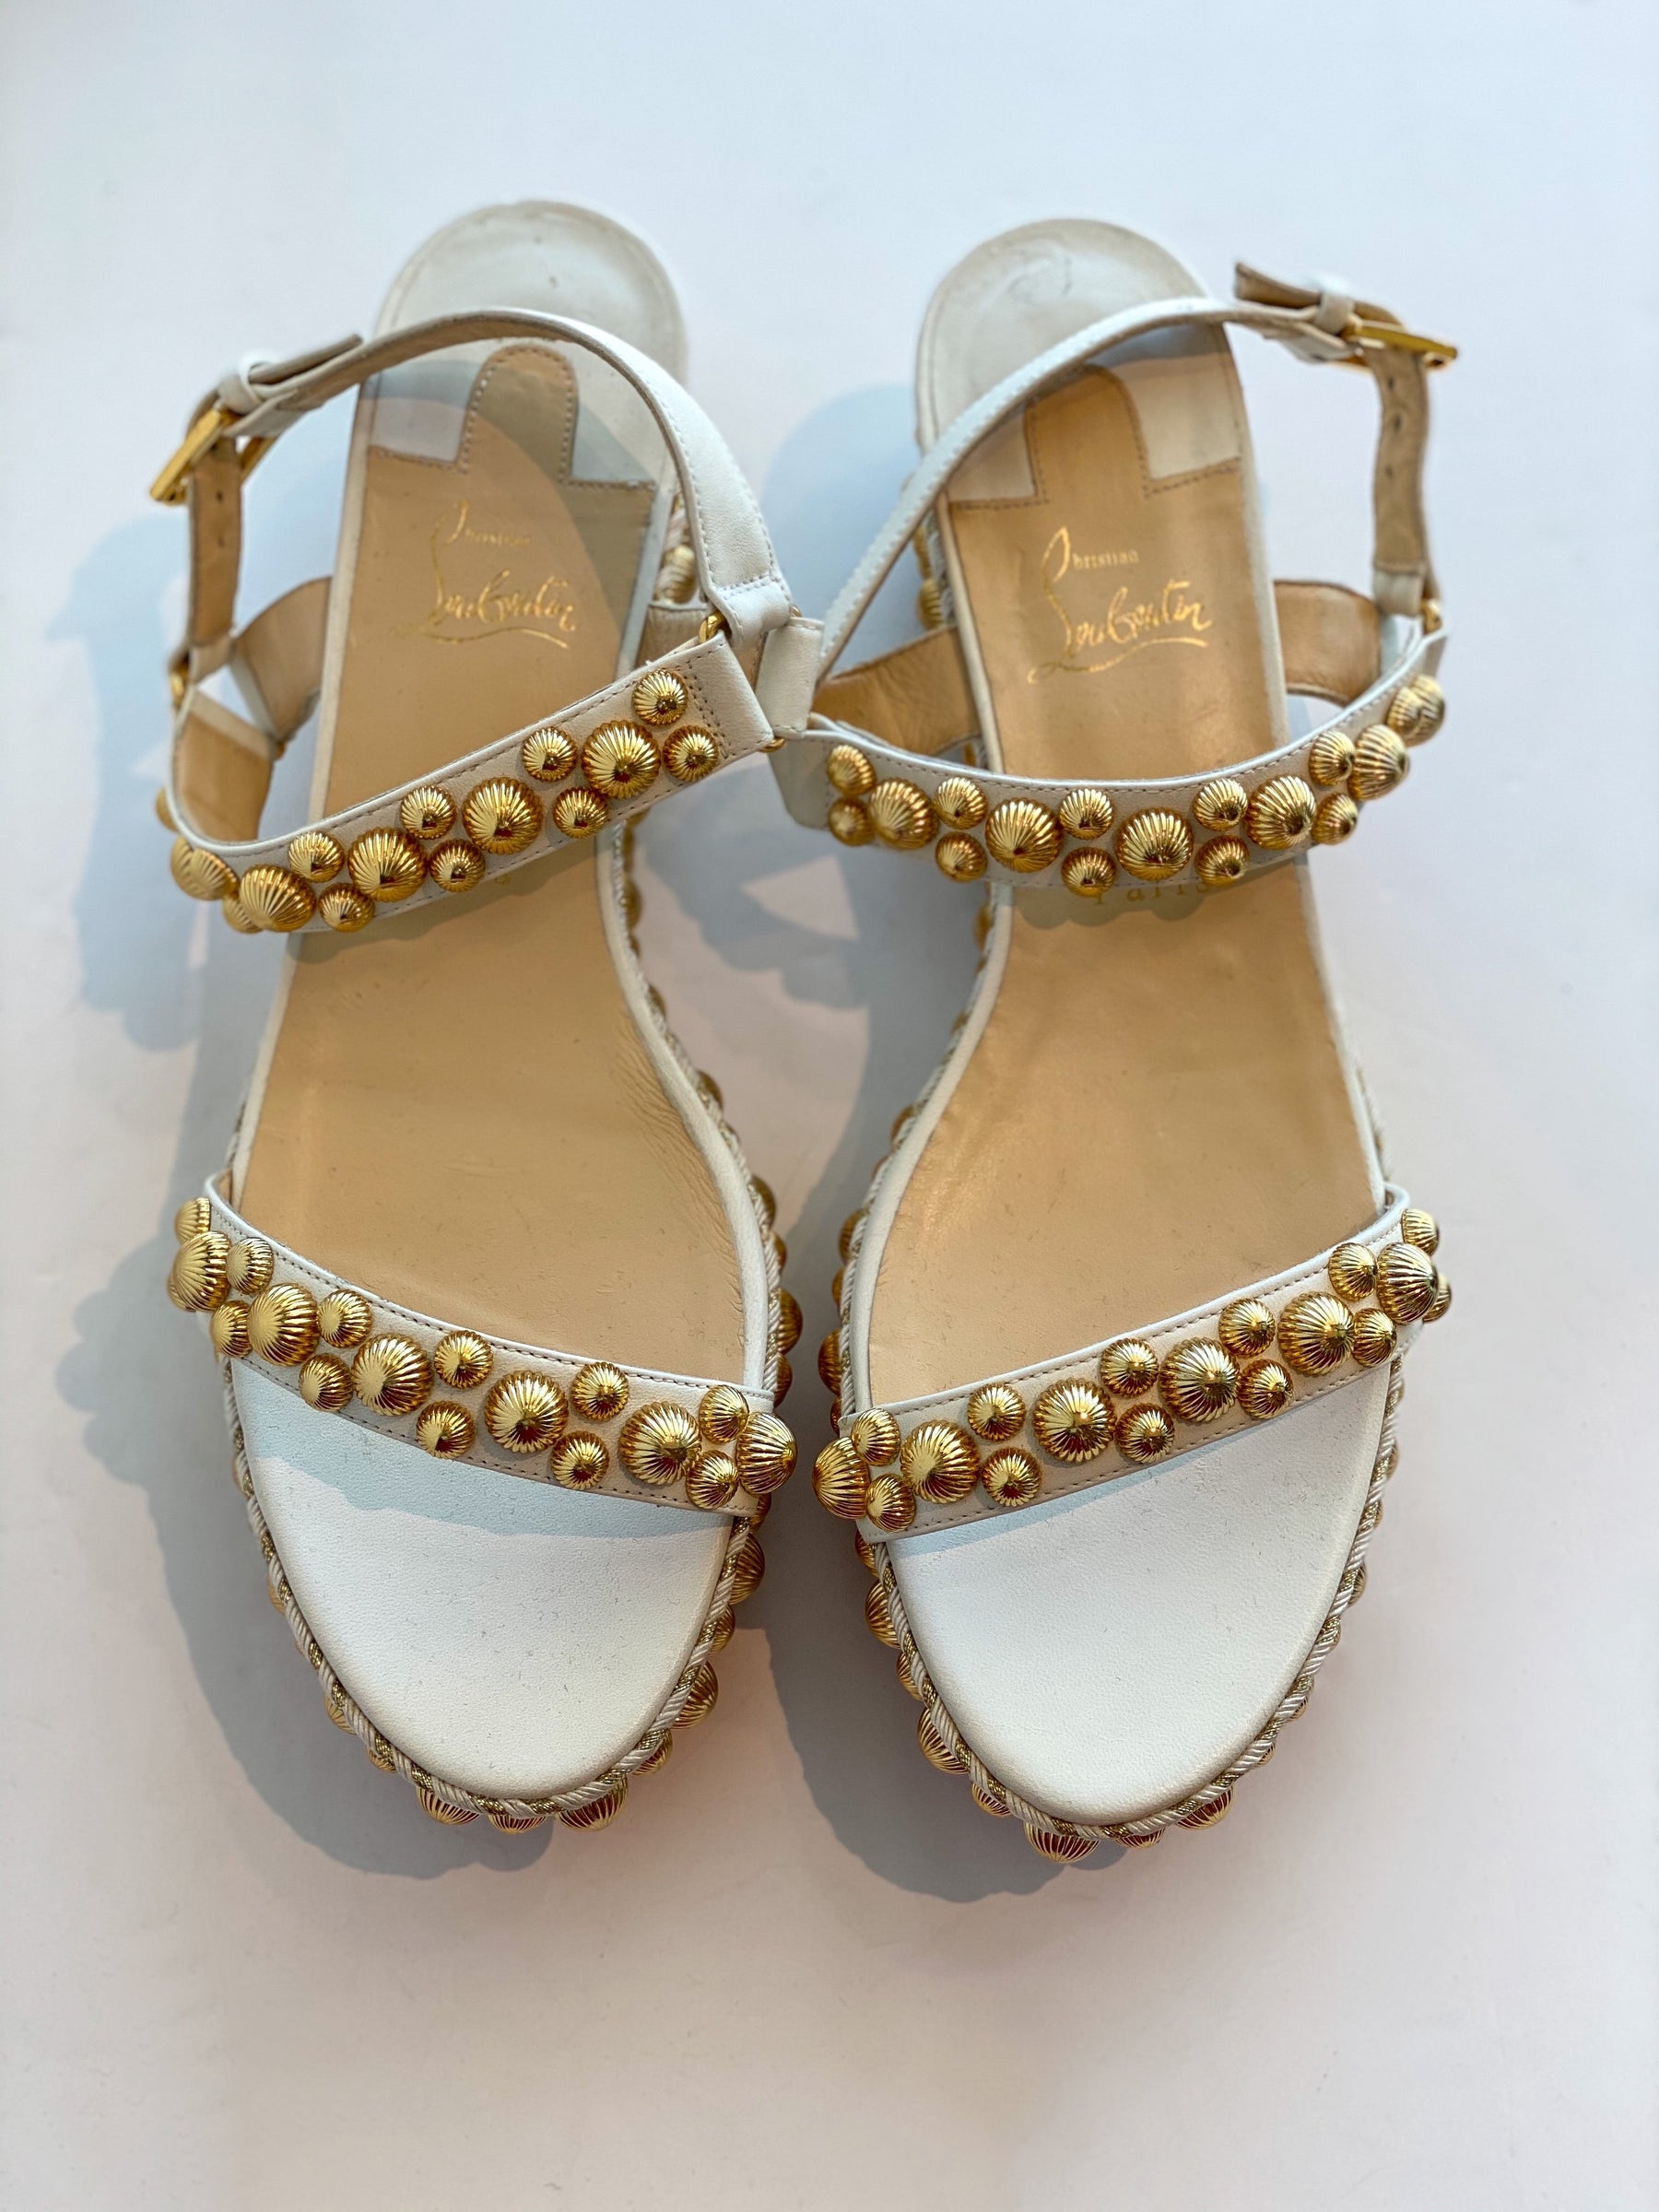 Christian Louboutin Studded Wedge Sandals White and Gold Top of Shoes